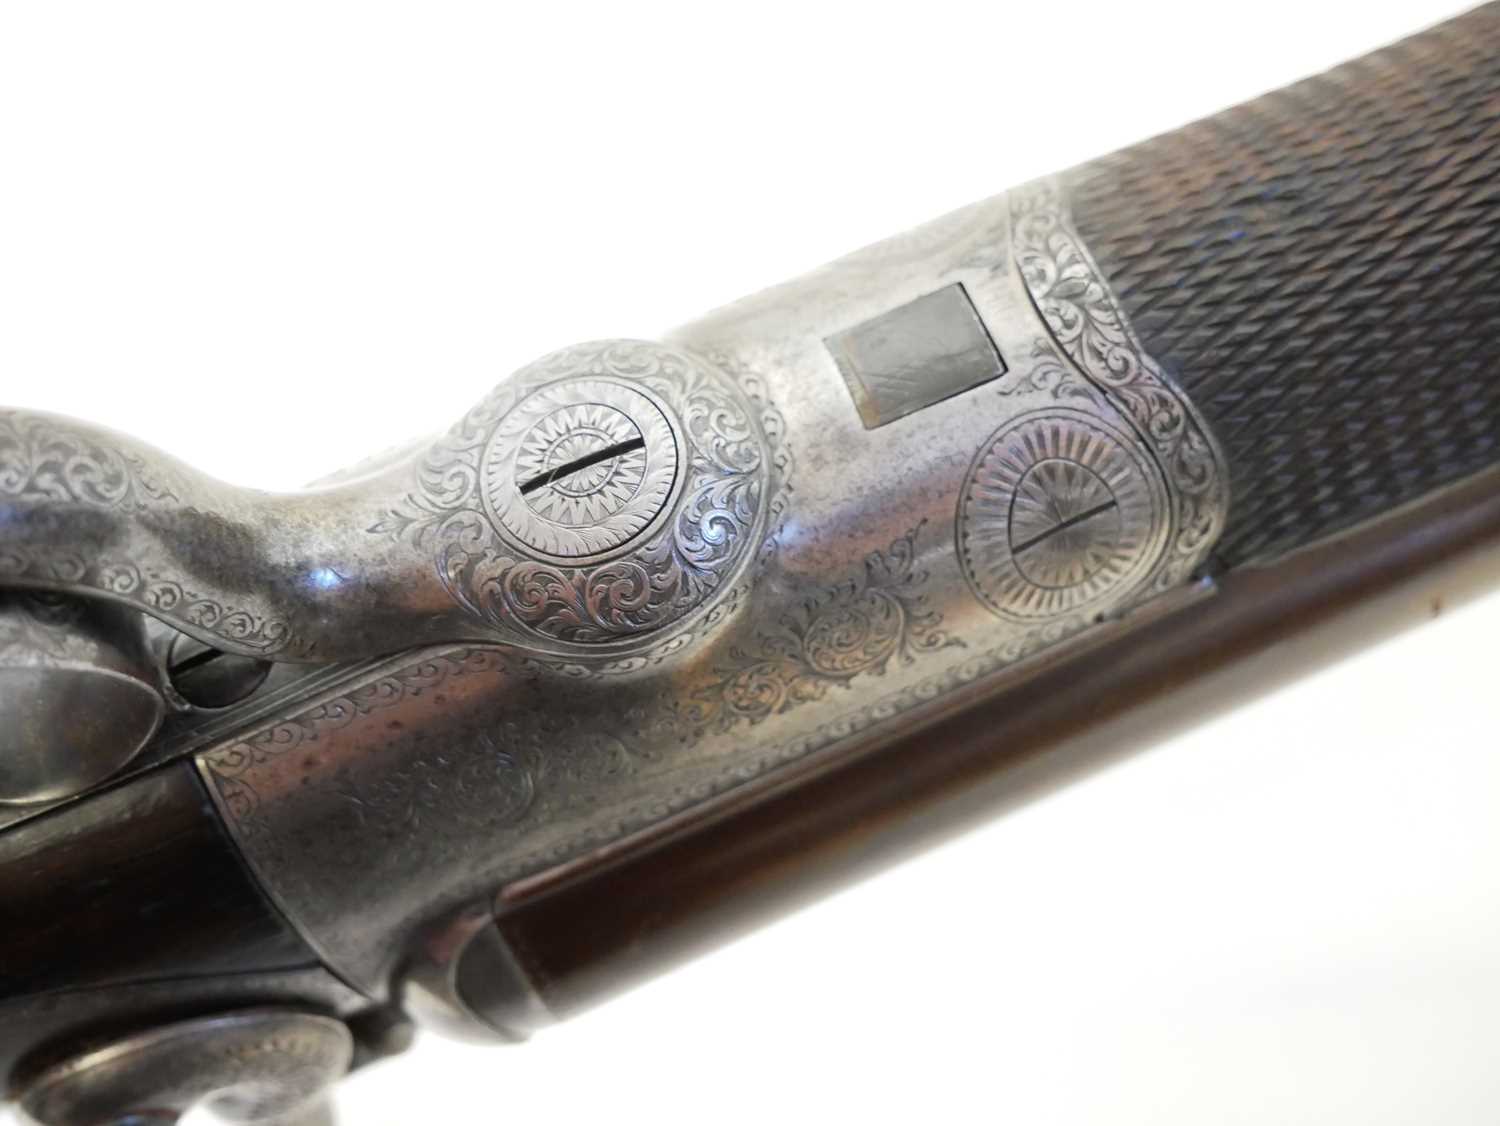 Venables and Son 12 bore side by side hammer gun with 2 3/4" chambers LICENCE REQUIRED - Image 11 of 16